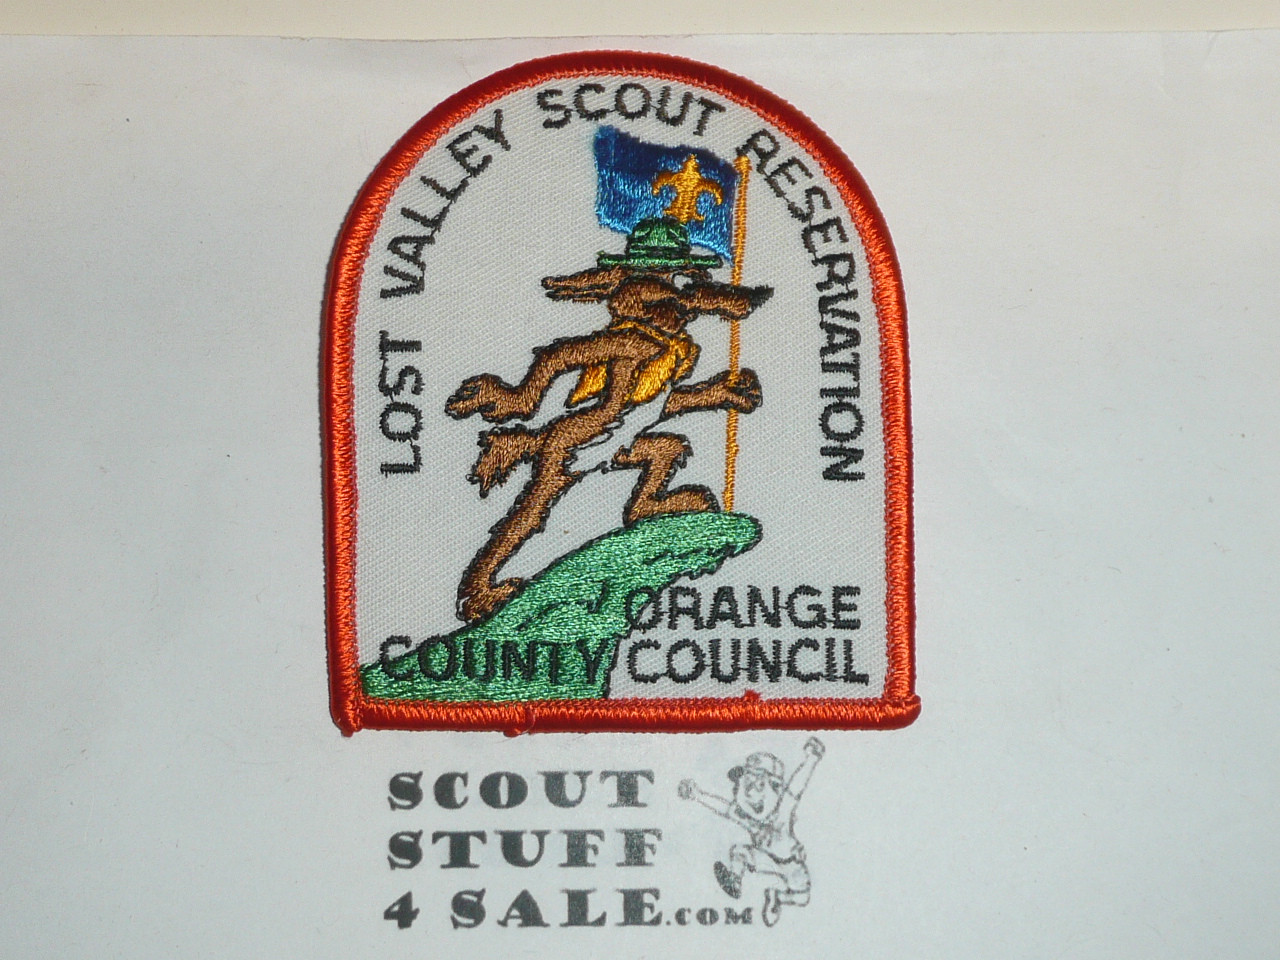 Lost Valley Scout Reservation Dome Patch, orange bdr